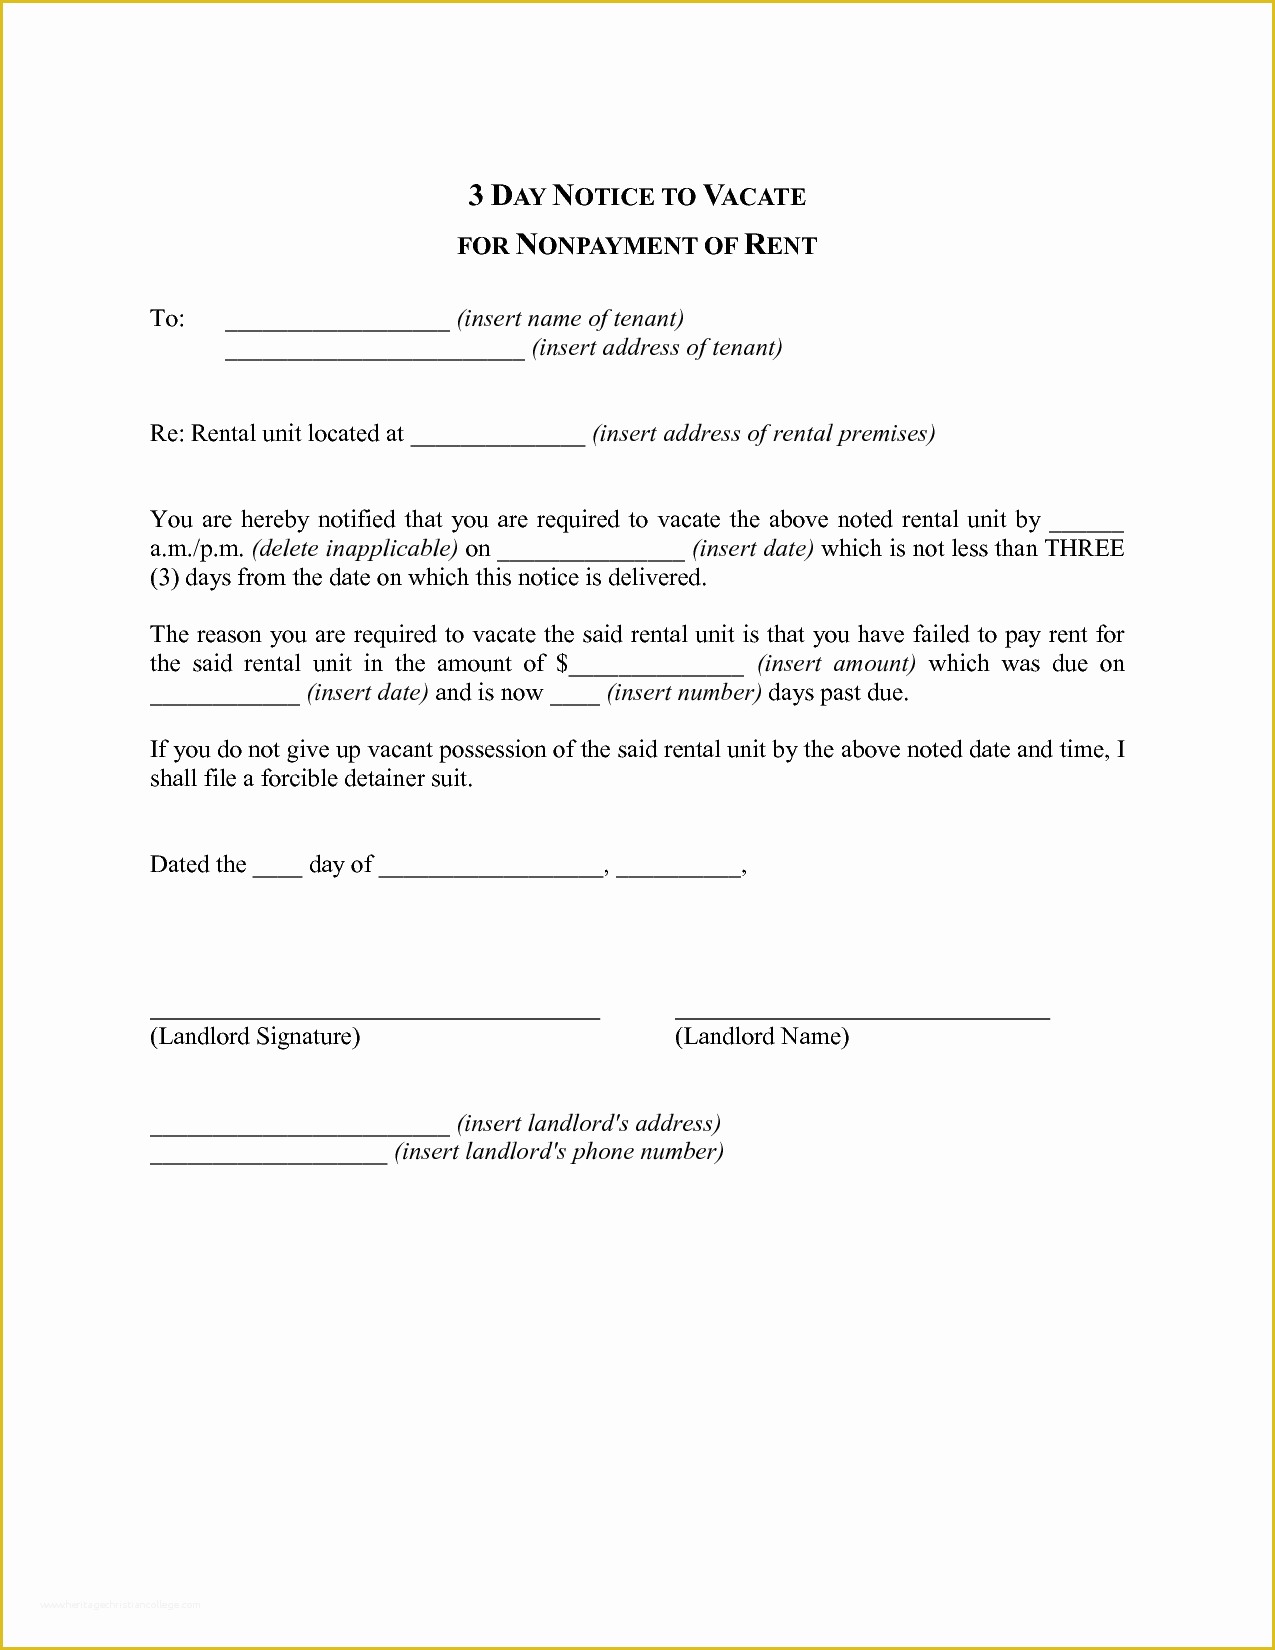 Free 3 Day Notice Template Of 9 Best S Of Texas Notice to Quit form 30 Day